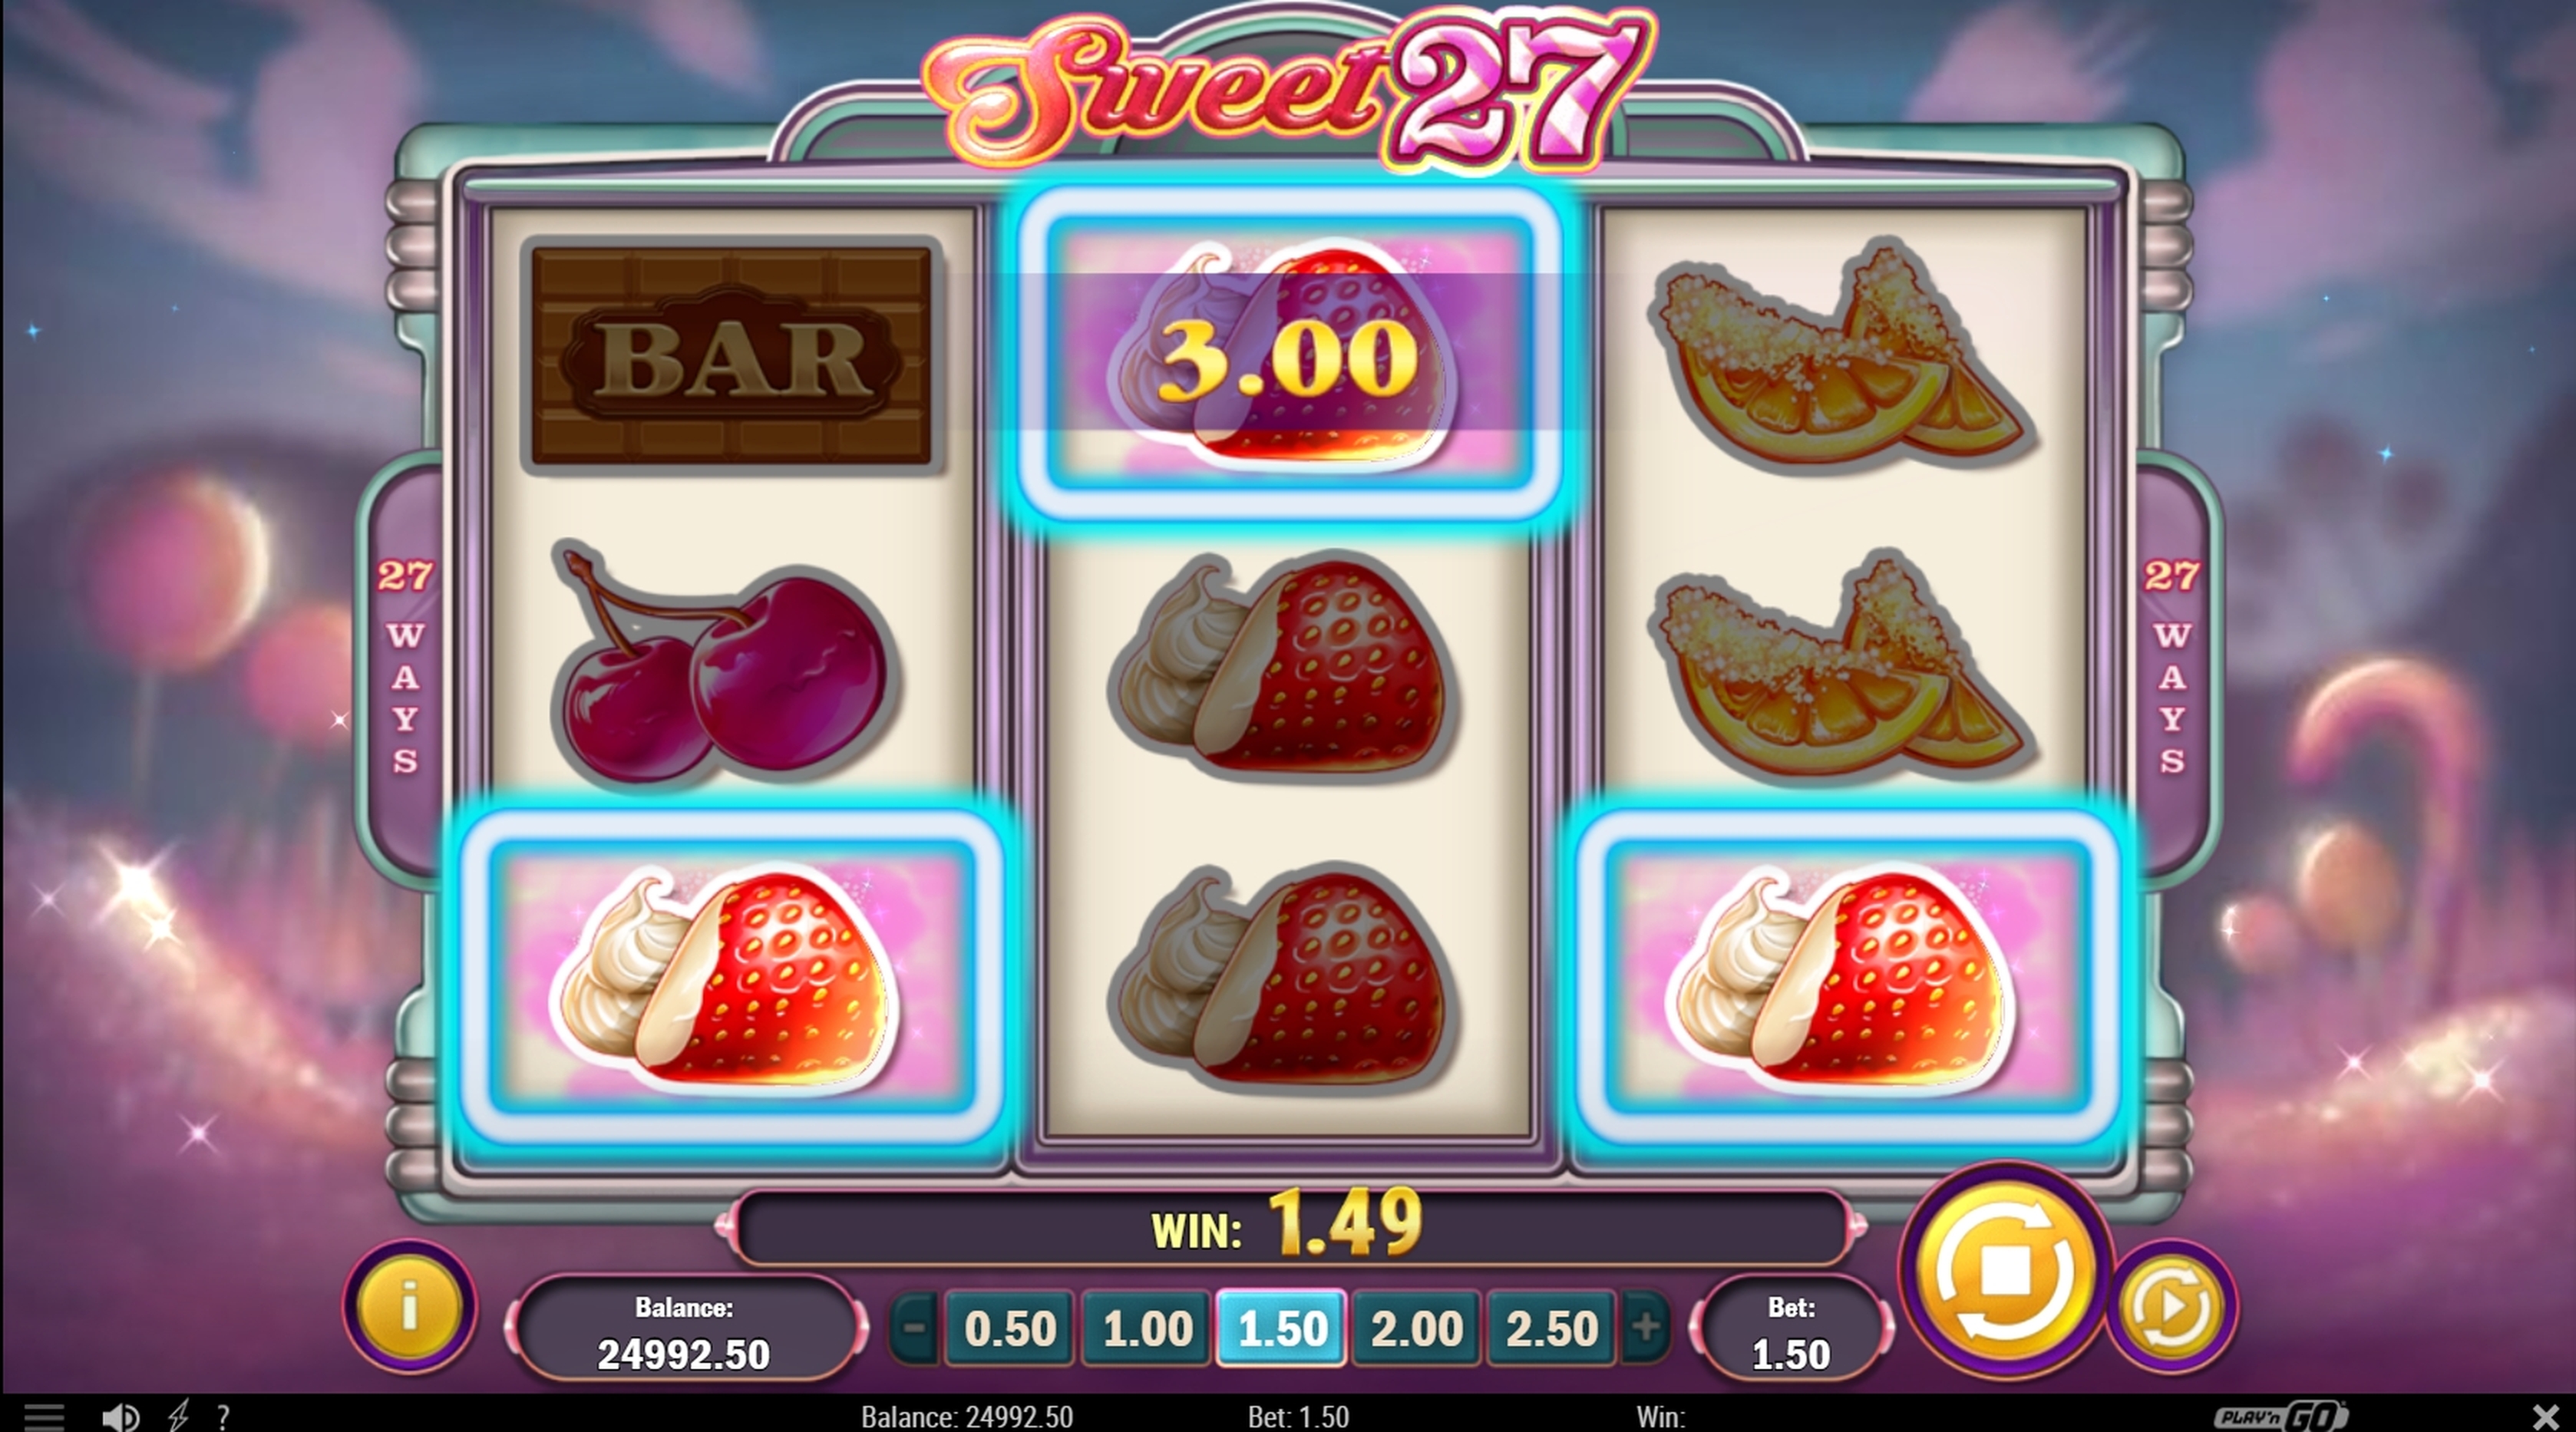 Win Money in Sweet 27 Free Slot Game by Playn GO